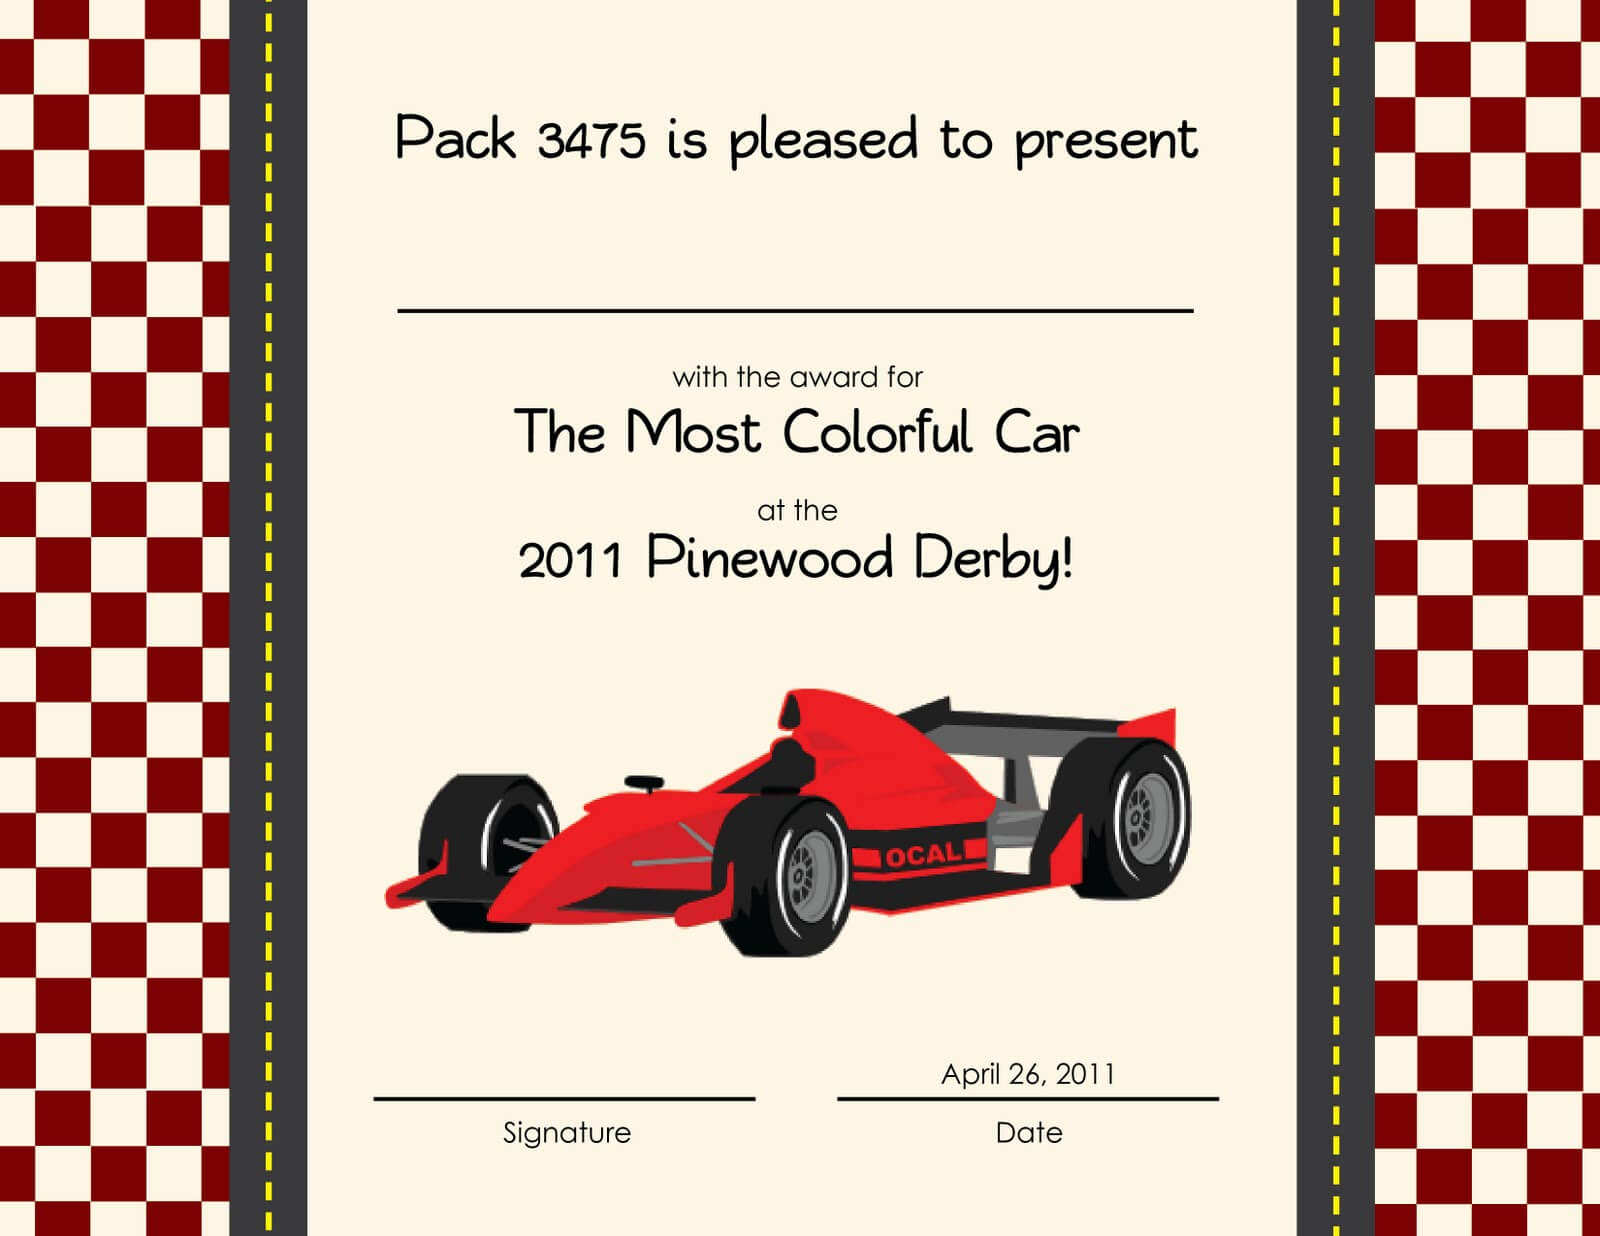 Pinewood Derby Certificate Templates ] – Pinewood Derby For Pinewood Derby Certificate Template